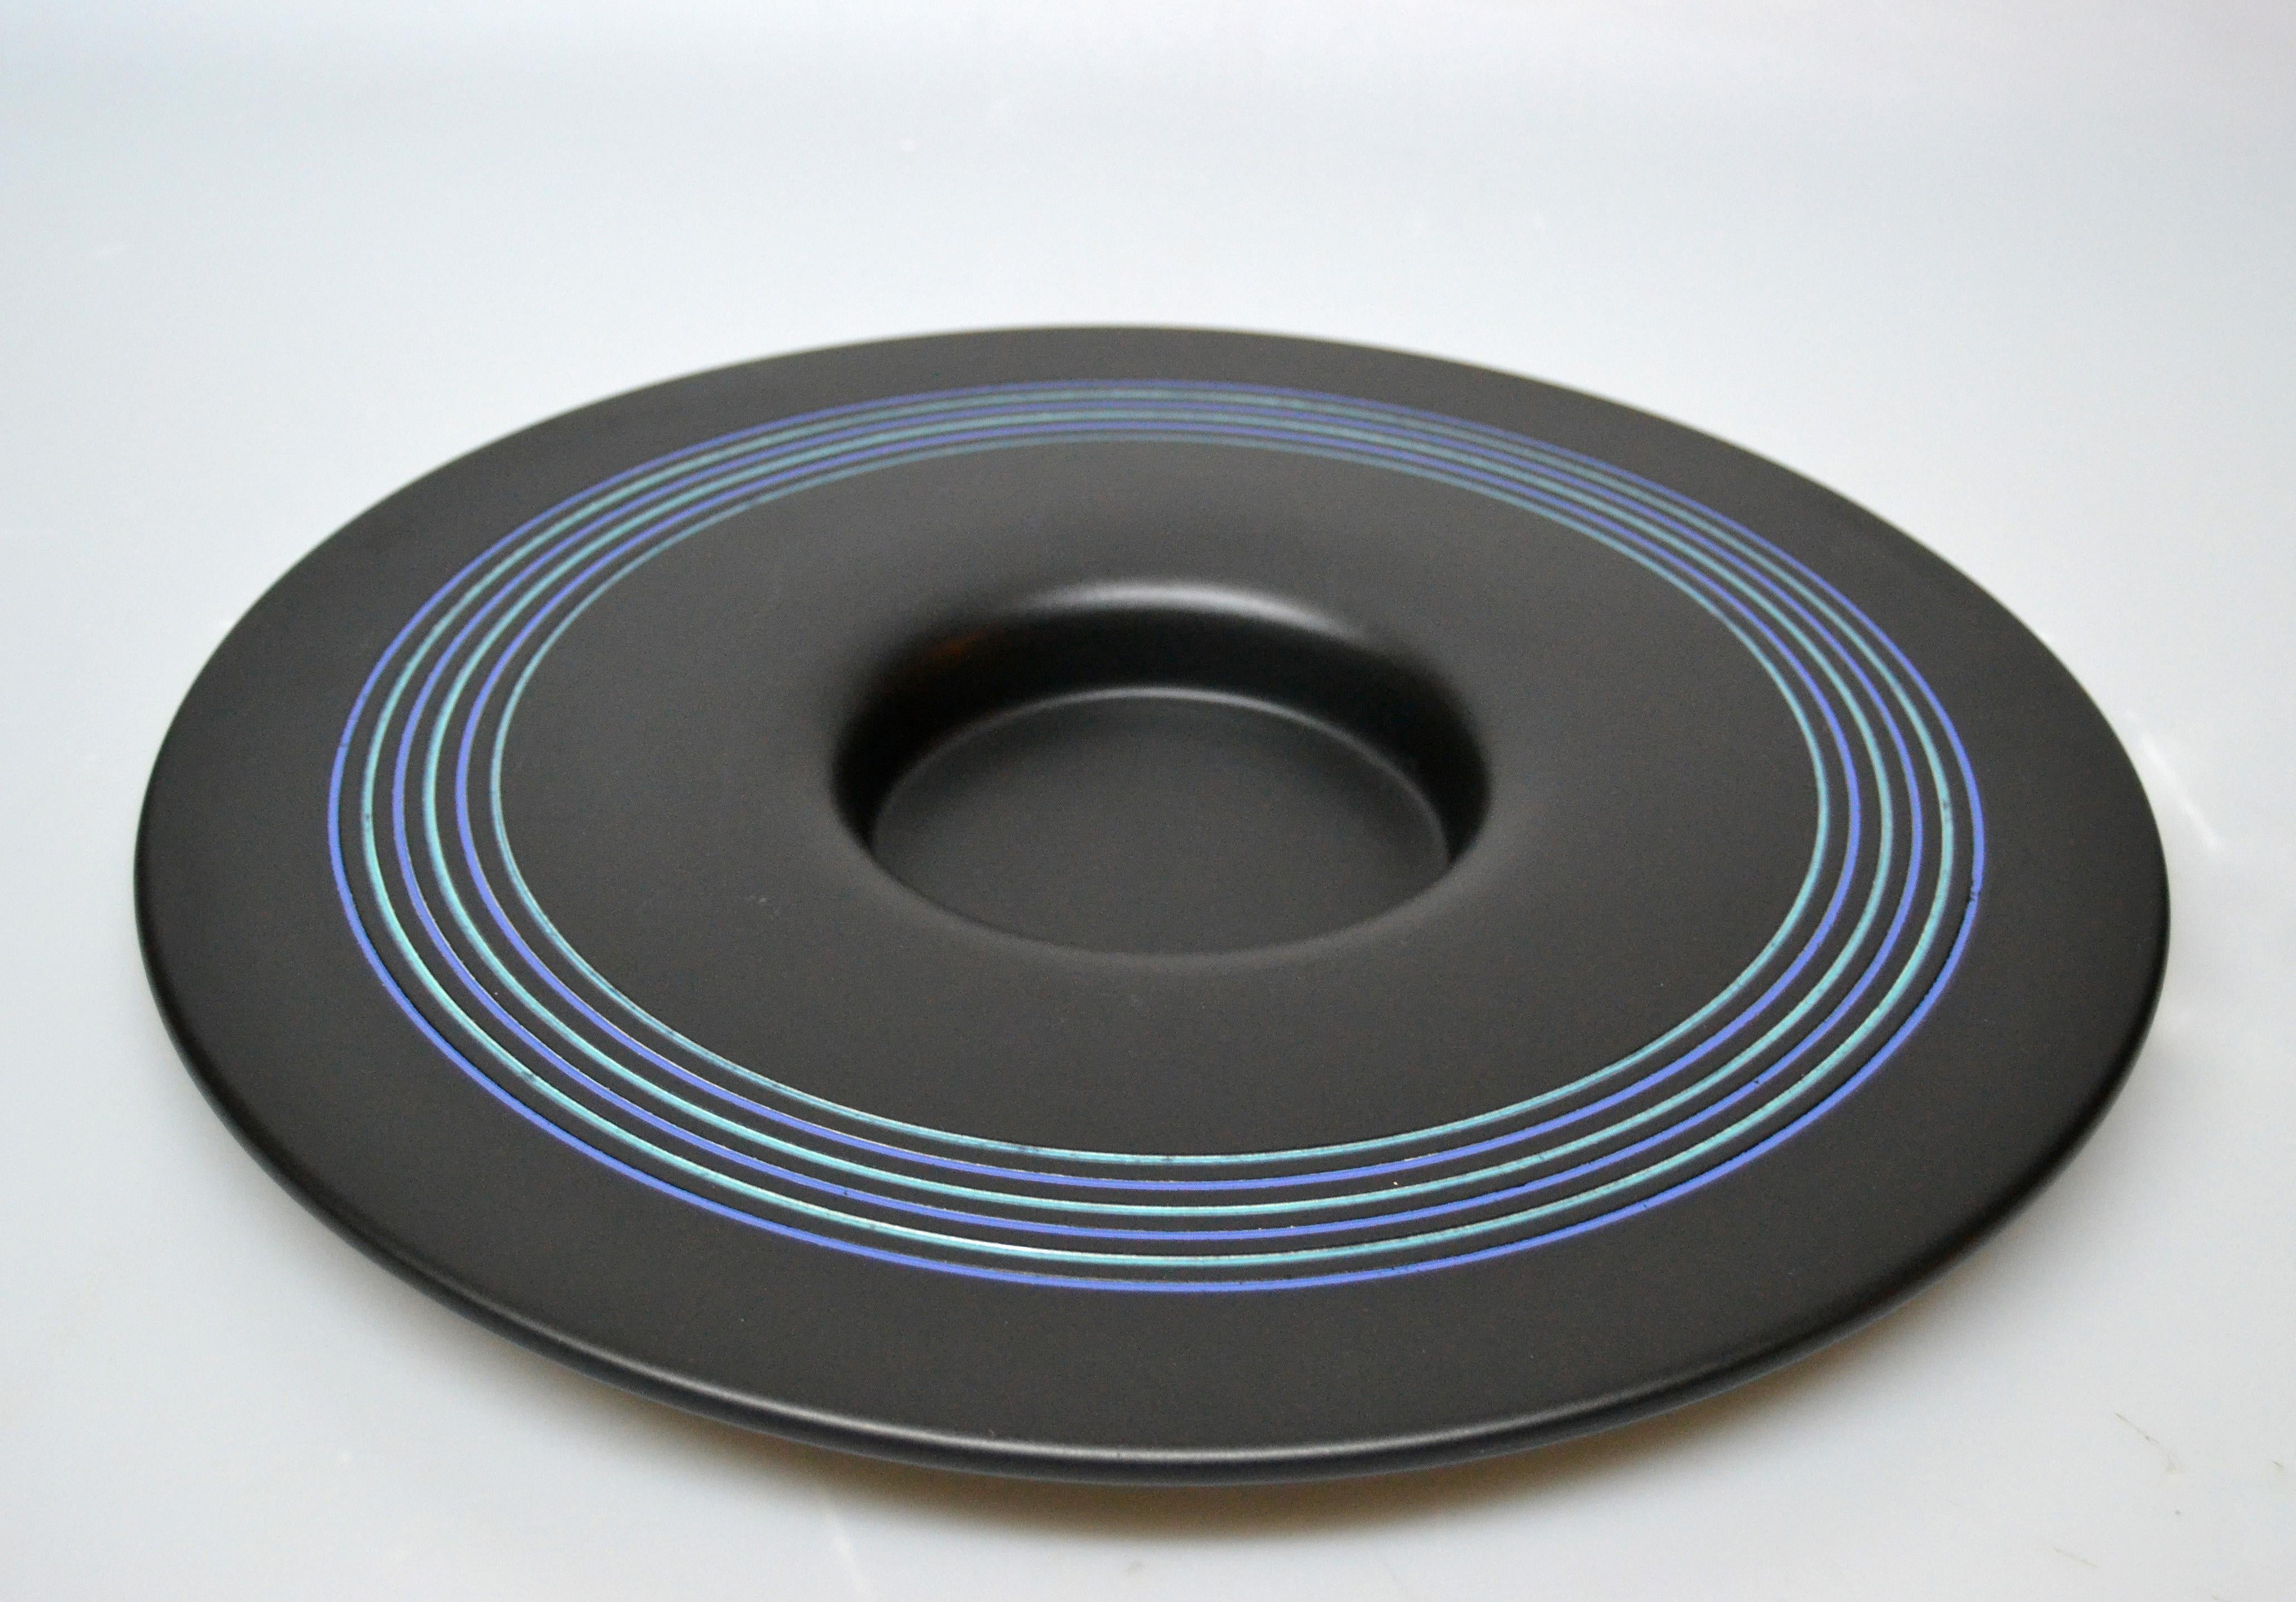 Late 20th Century Sicart Ceramic Plate, Centerpiece, Fruit Bowl in Black & Blue by Boccato, Italy